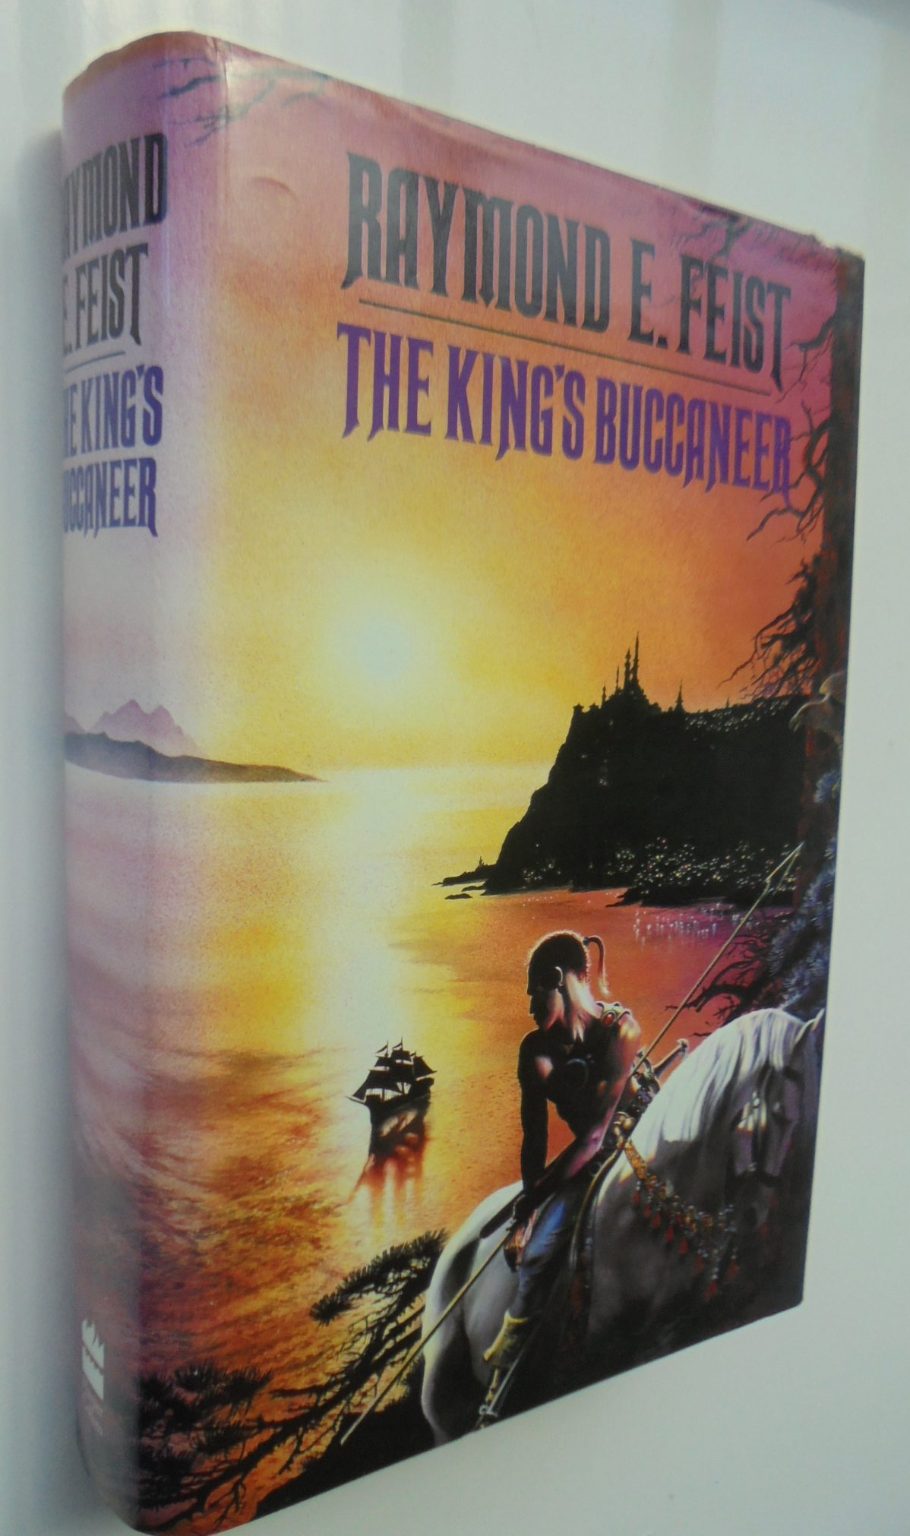 The King's Buccaneer. First Edition. By Raymond E. Feist.